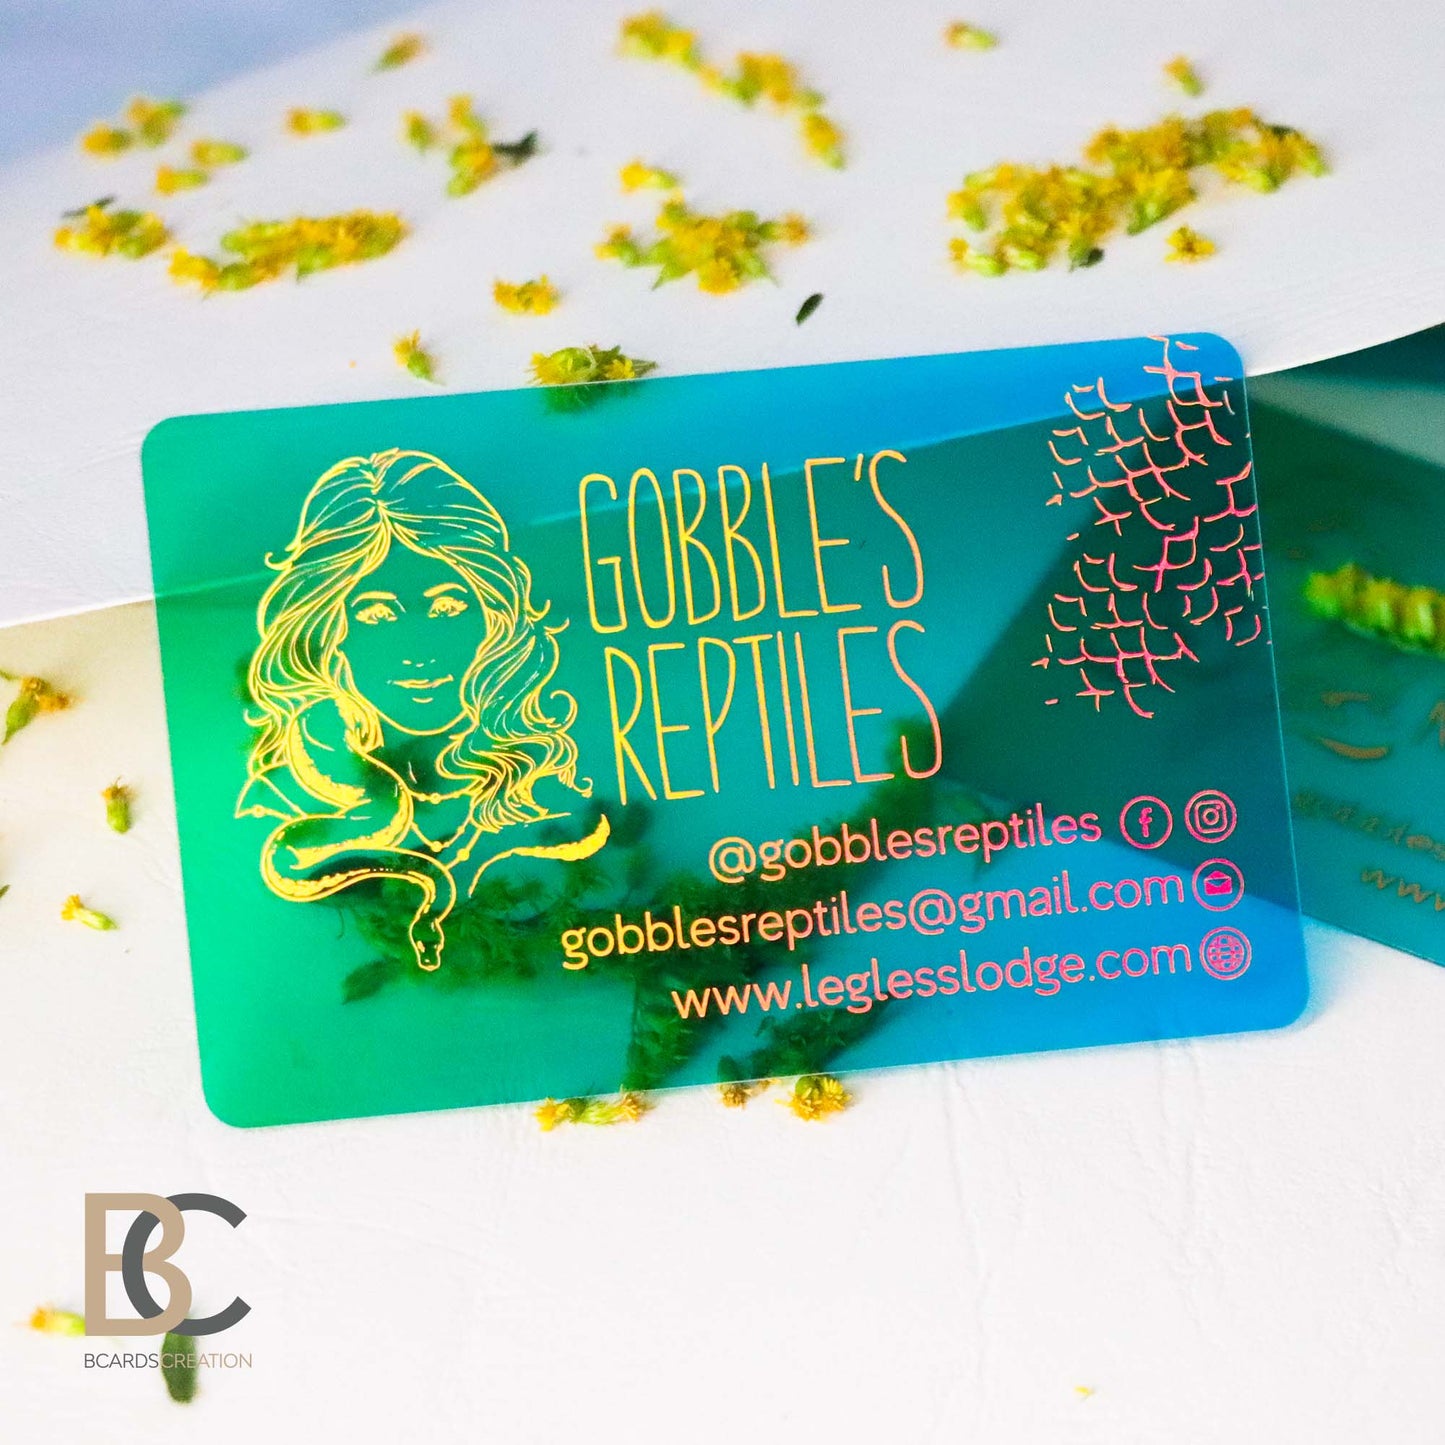 Waterproof Business Cards | Full color Clear Plastic Business Cards